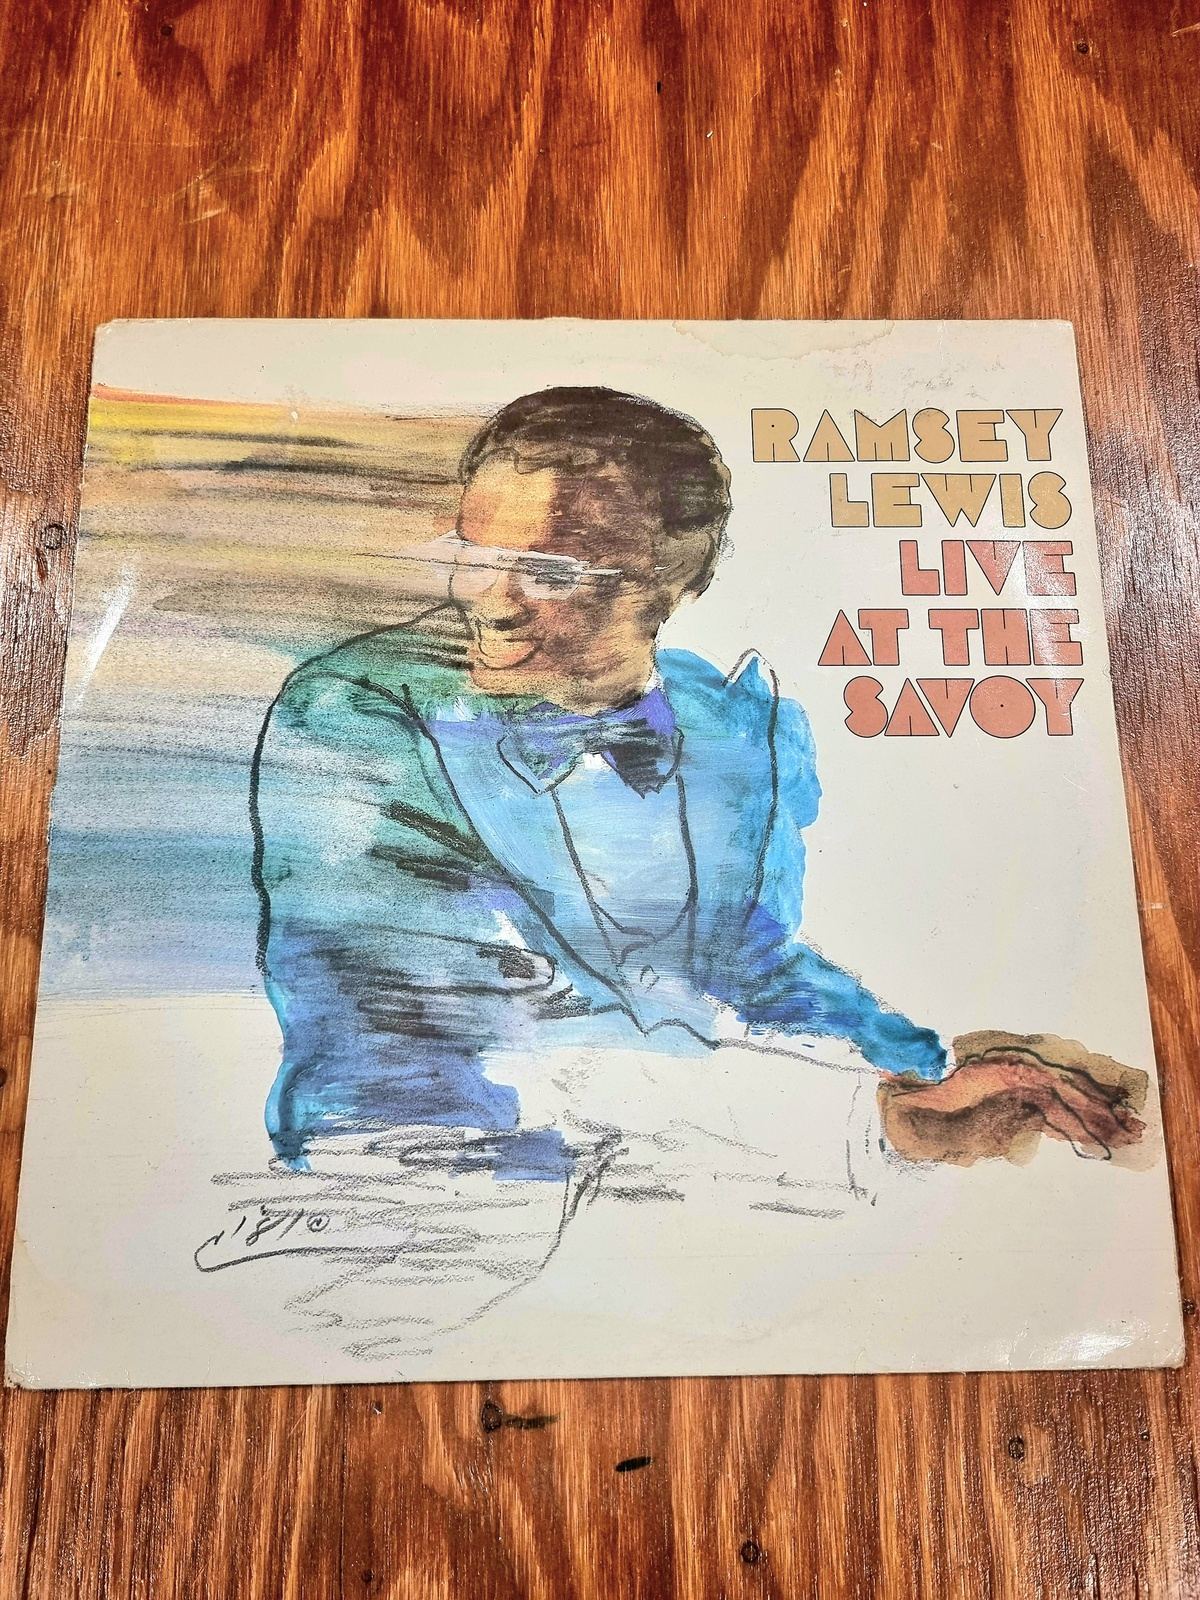 Ramsey Lewis – Live At The Savoy